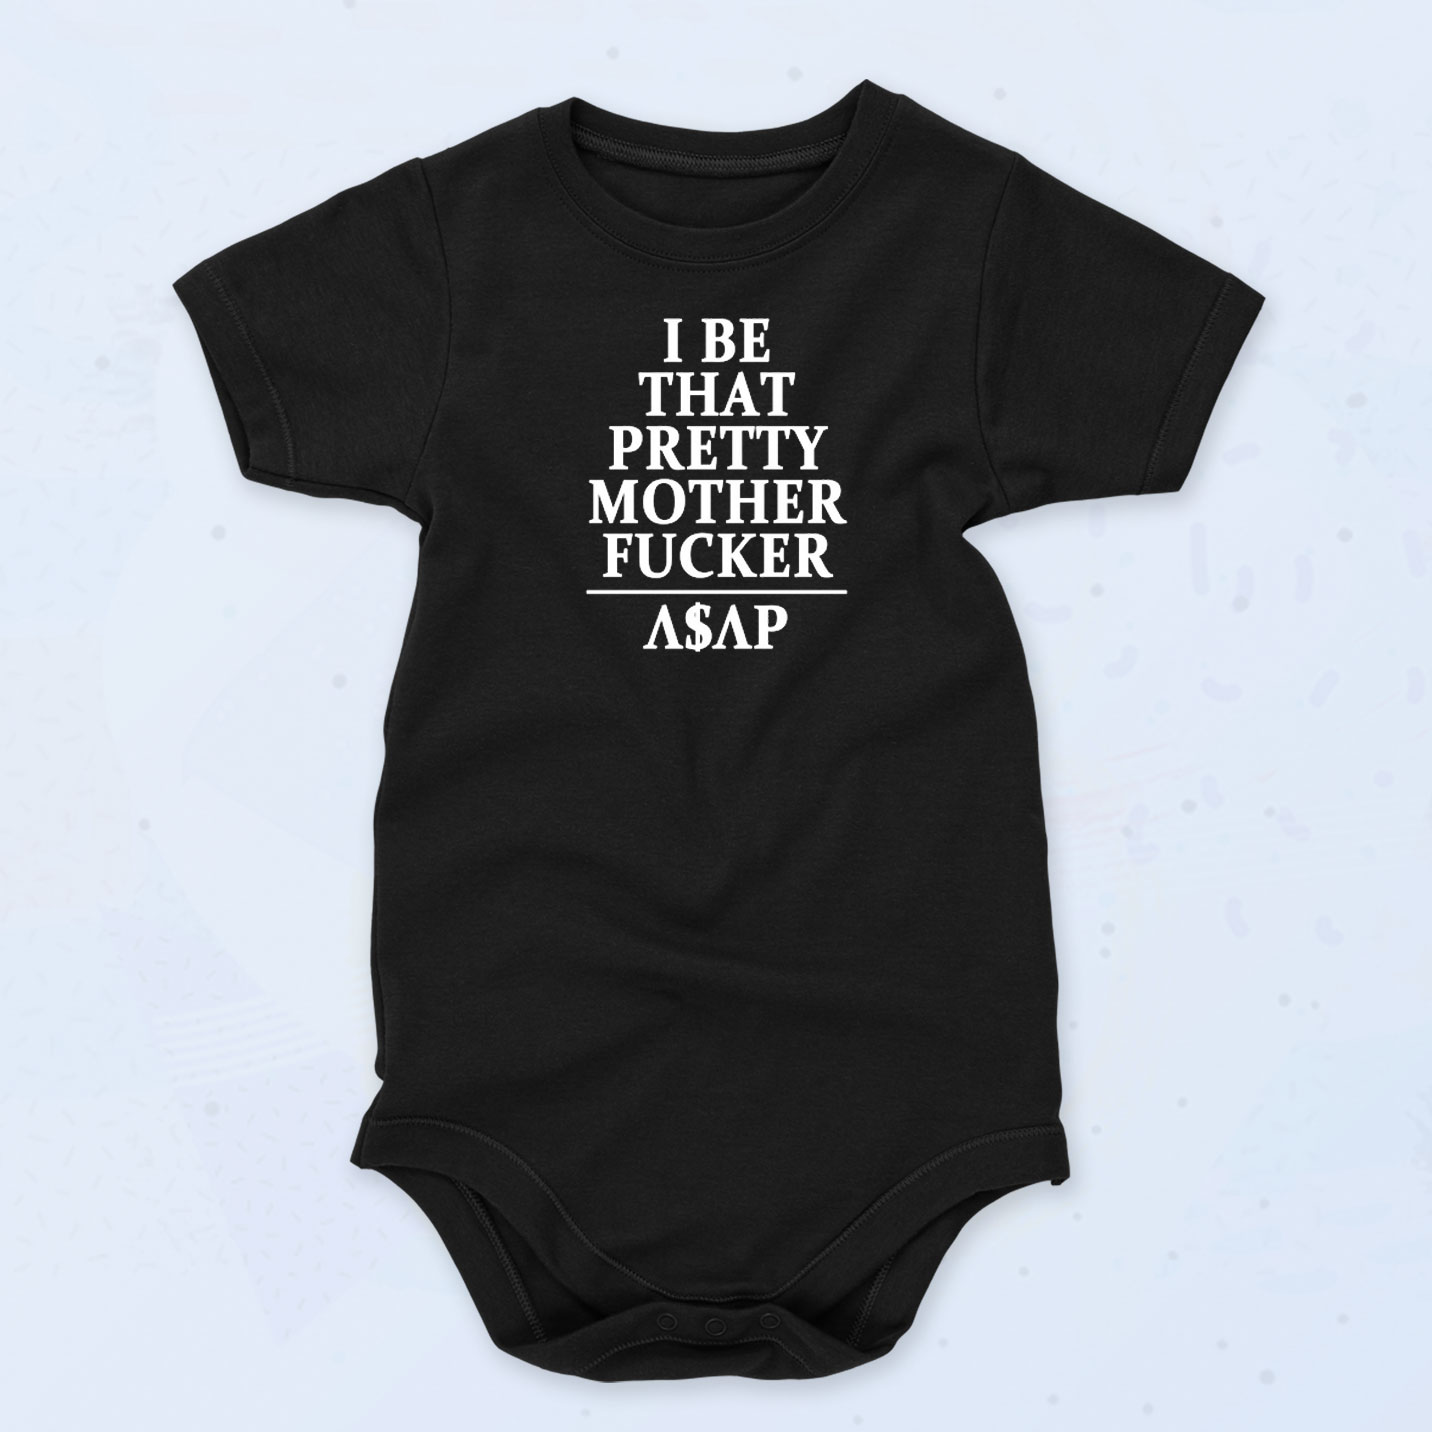 I Be That Pretty Mother Fucker Baby Onesie, Baby Clothes - 90slothes.com